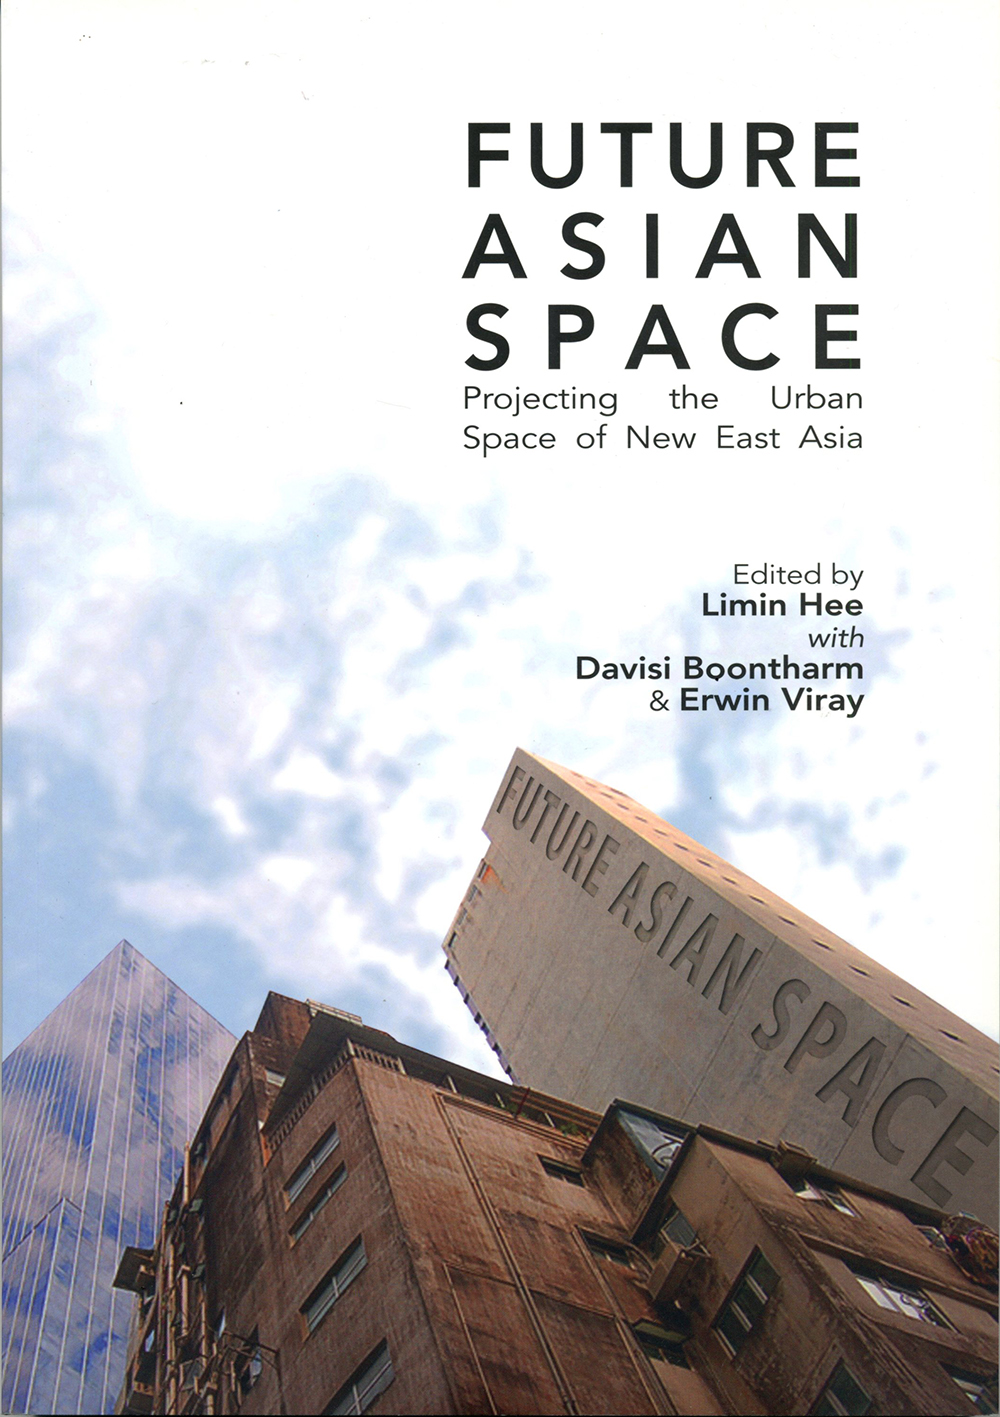 Future Asian Space: Projecting the Urban Space of New East Asia